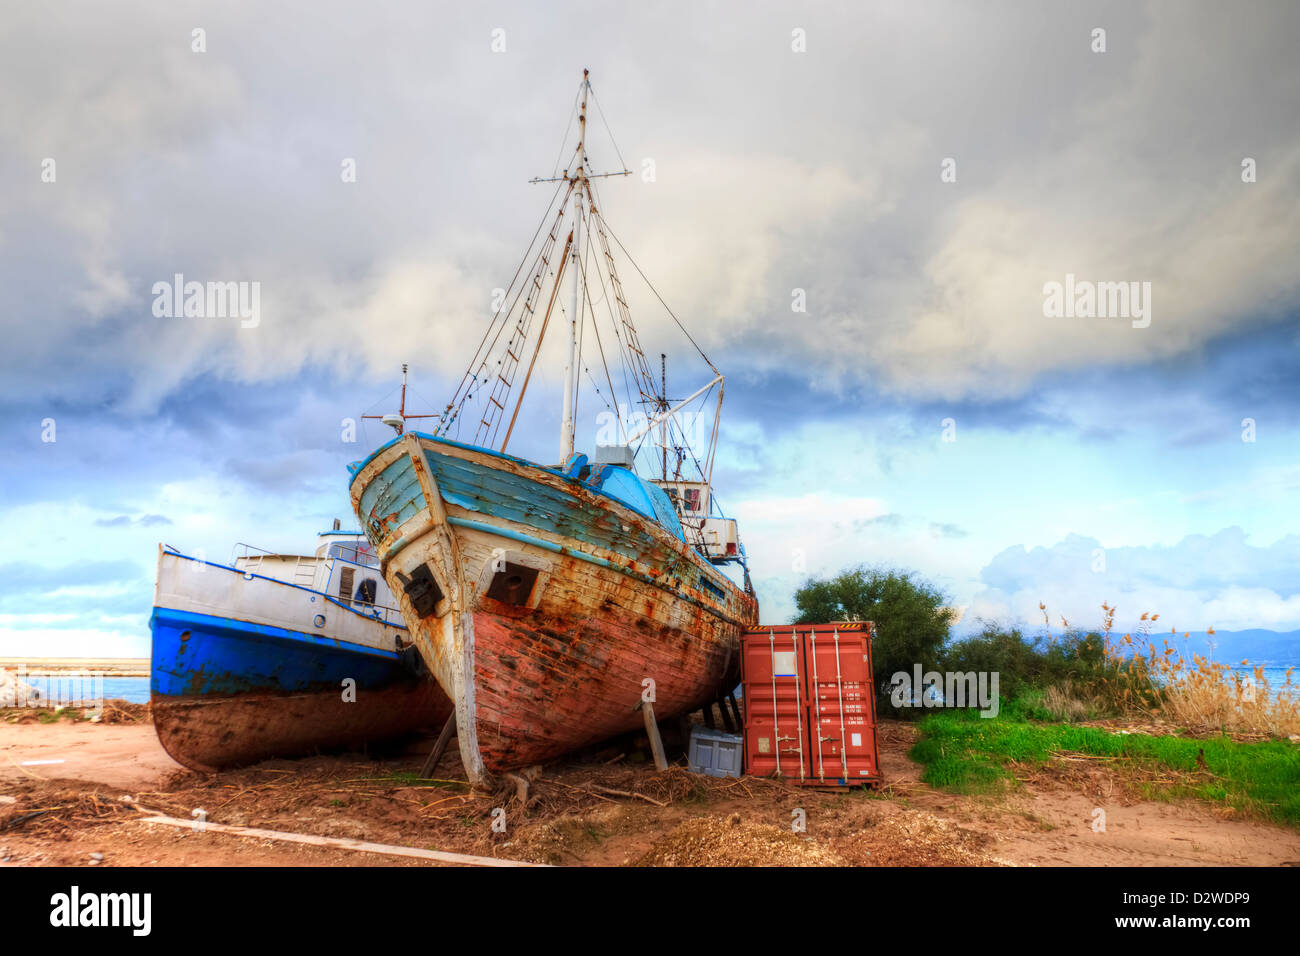 Old ship and shipping container Stock Photo